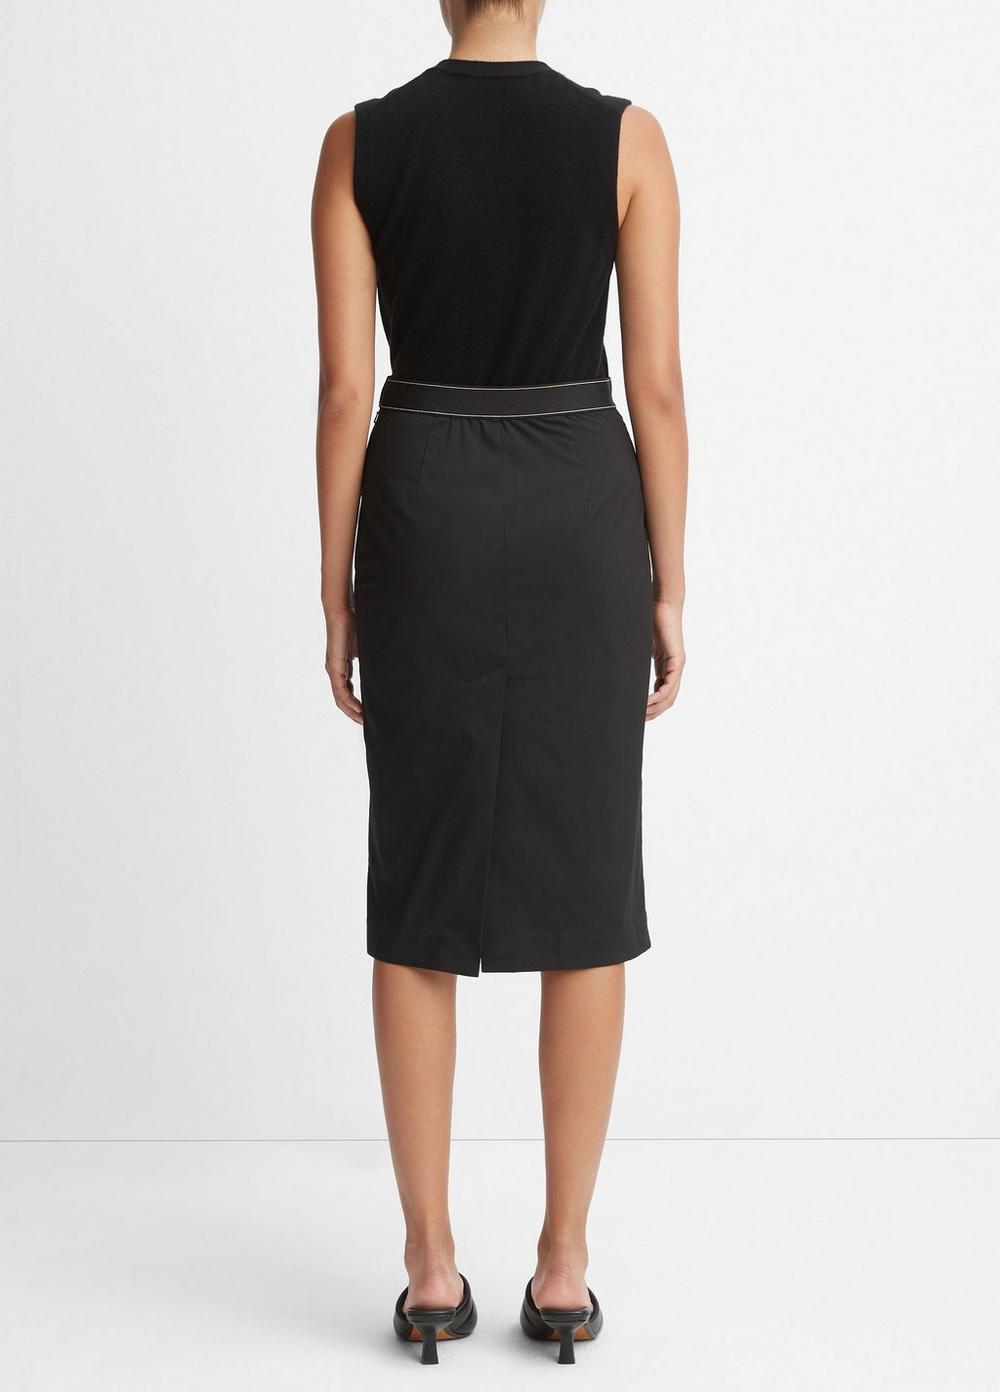 Pull-On Pencil Skirt in Dresses & Skirts | Vince